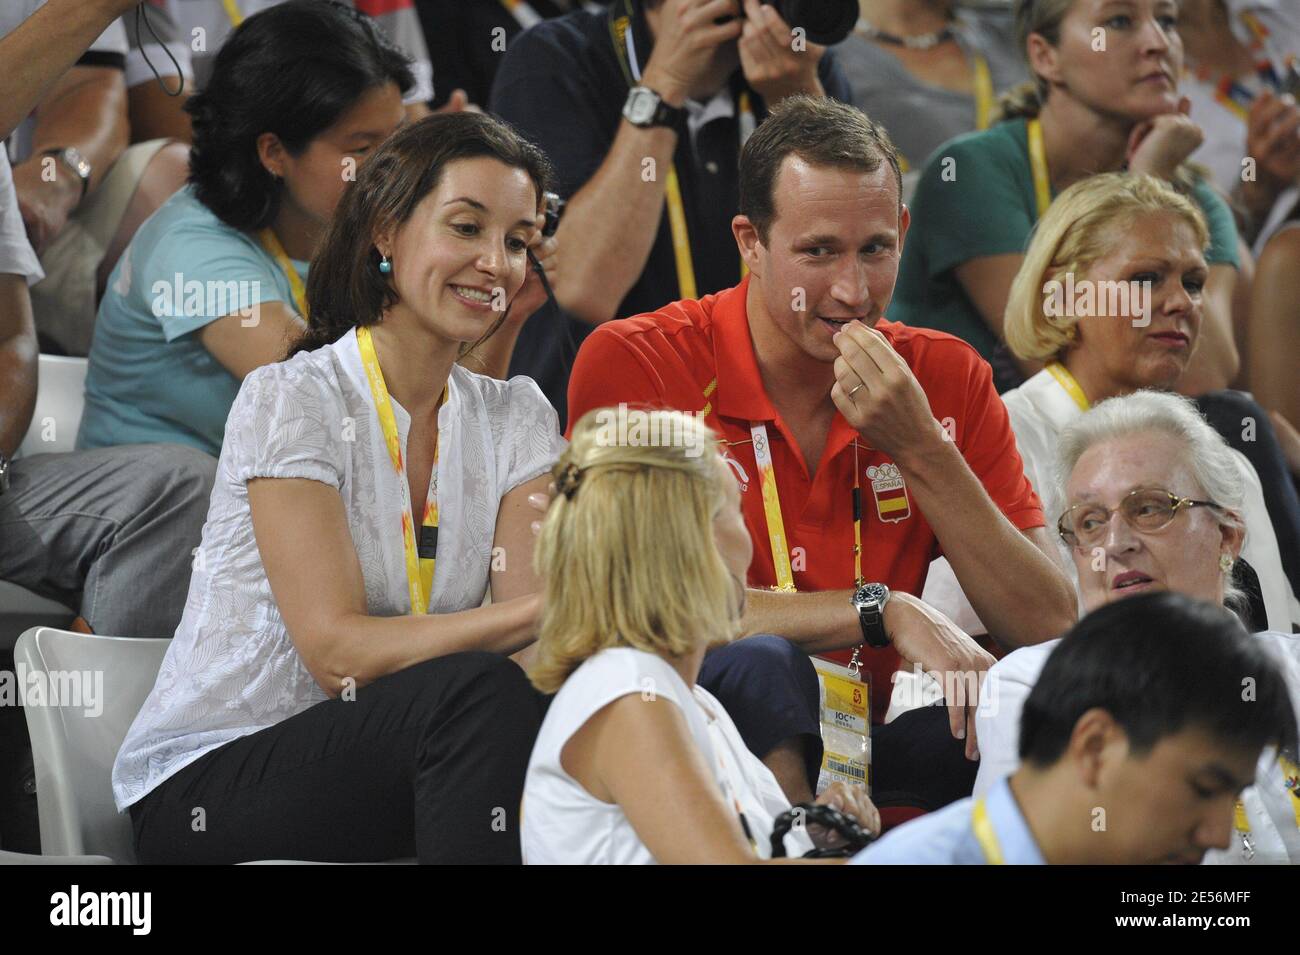 Princess Dona Pilar of Borbon with her son Bruno Gomez Acebo of Borbon and his girlfriend Barbara Cano De La Plaza watch the match Spain's Rafael Nadal against Australia's Lleyton Hewitt a men's singles second round tennis match for the 2008 Beijing Olympic Games on August 12, 2008. Photo by Gouhier/Hahn/Nebinger/ABACAPRESS.COM Stock Photo